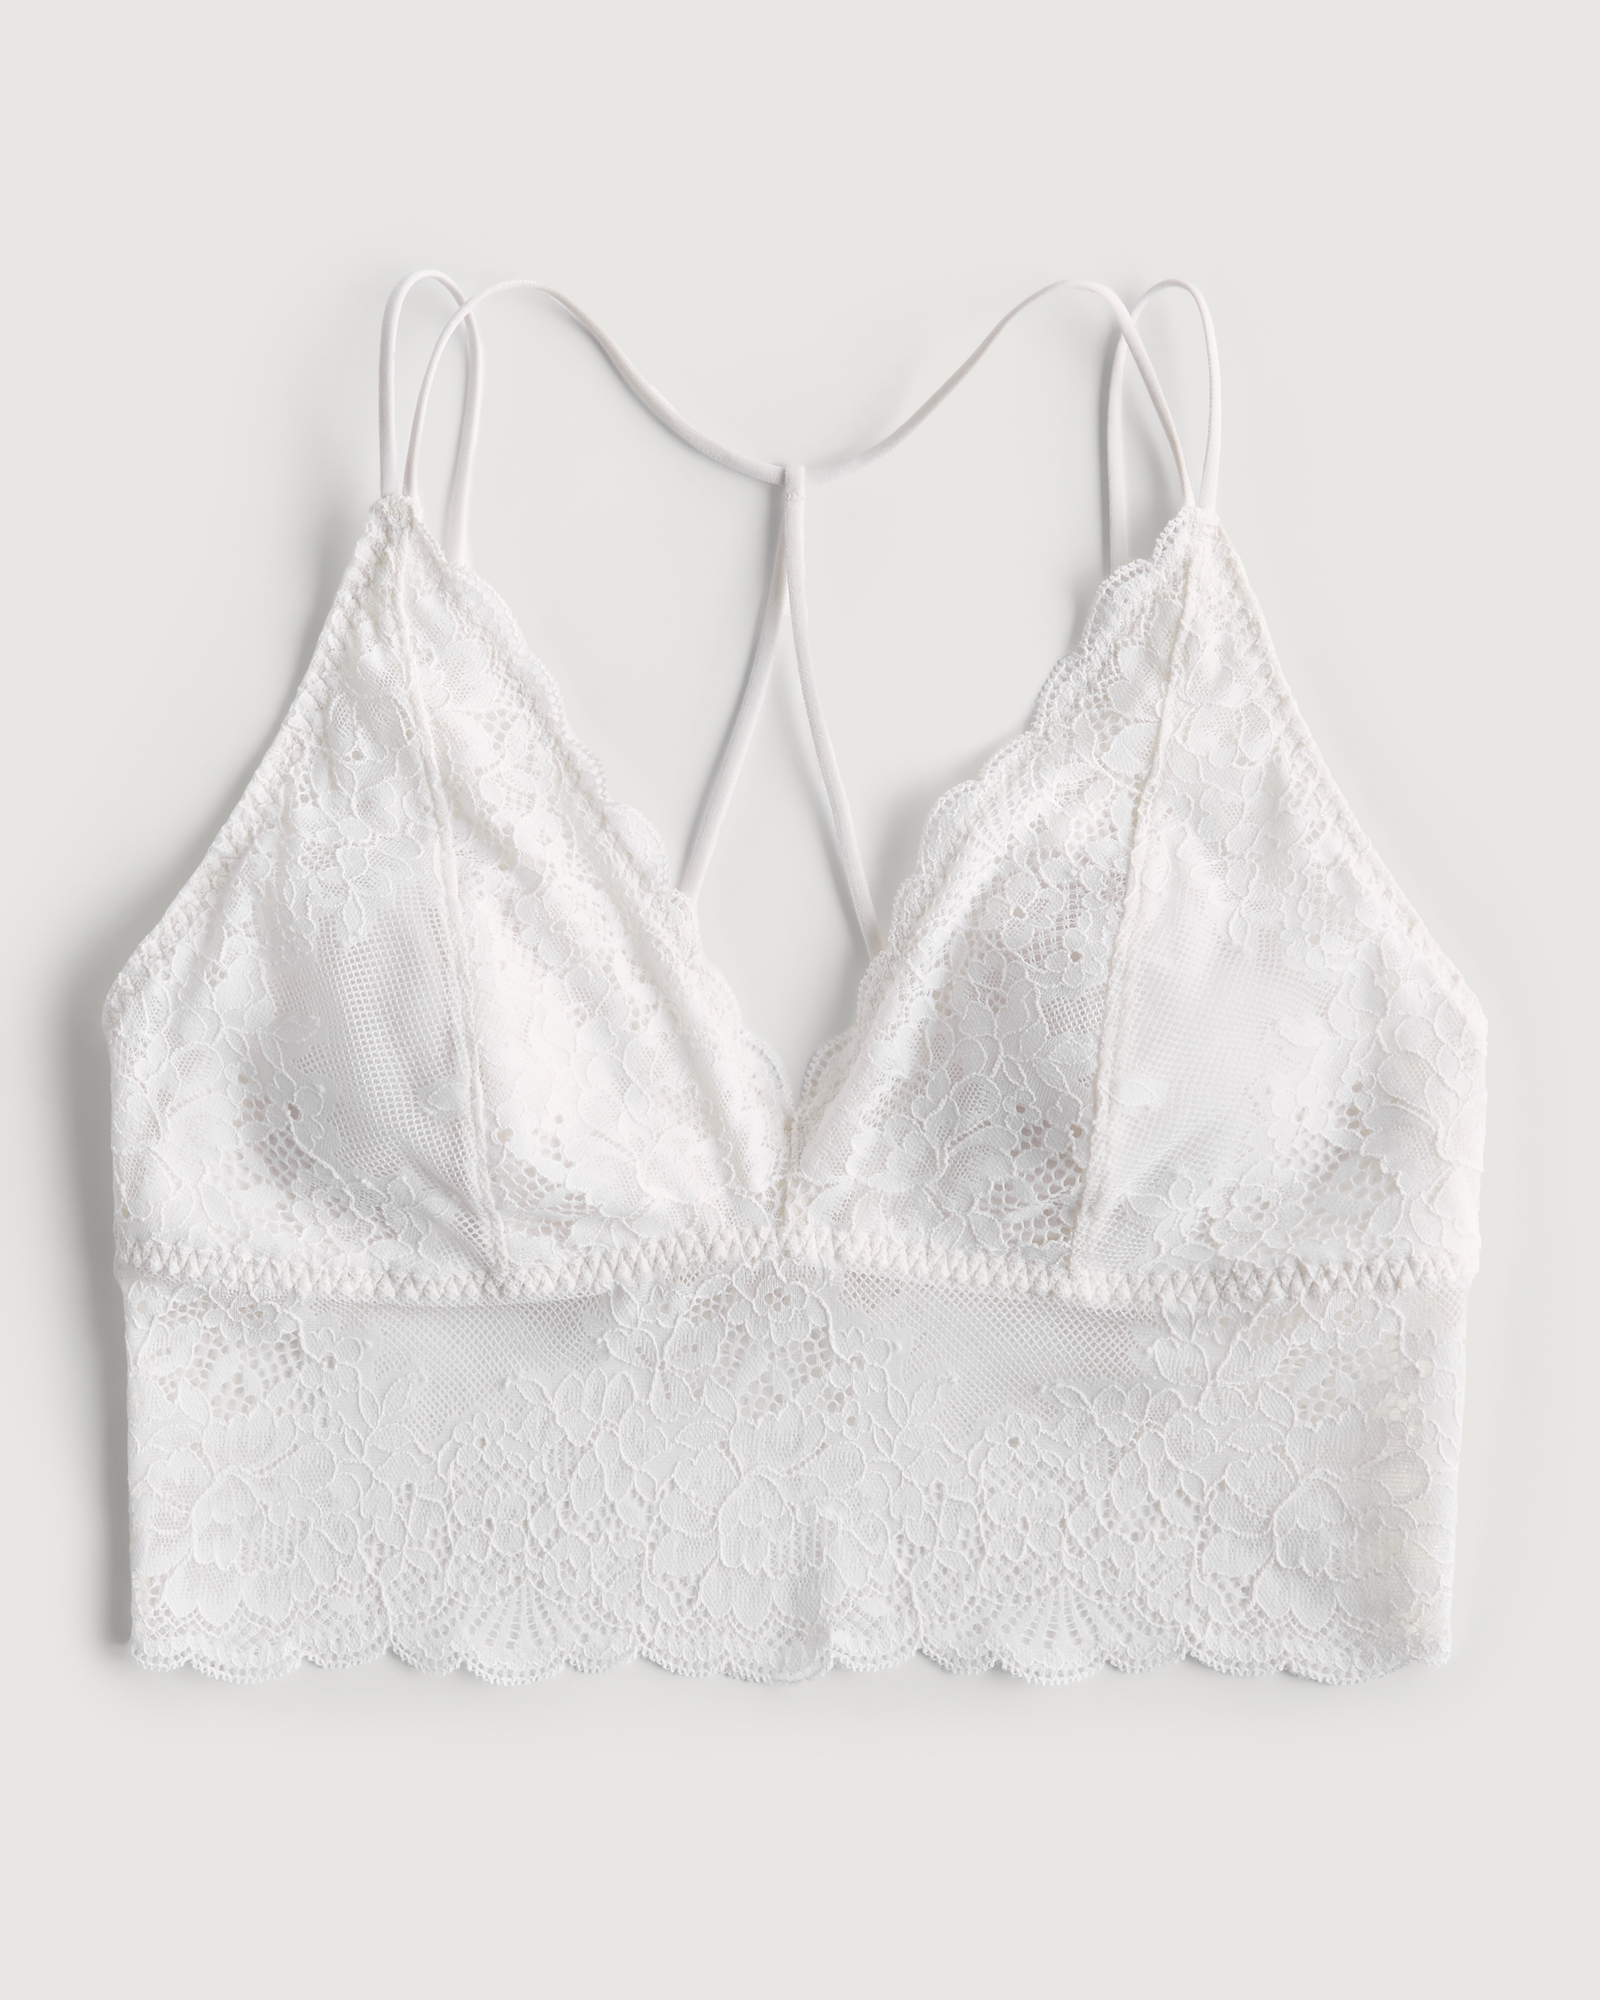 Hollister Bralette Black Size XS - $9 (55% Off Retail) - From Chloe